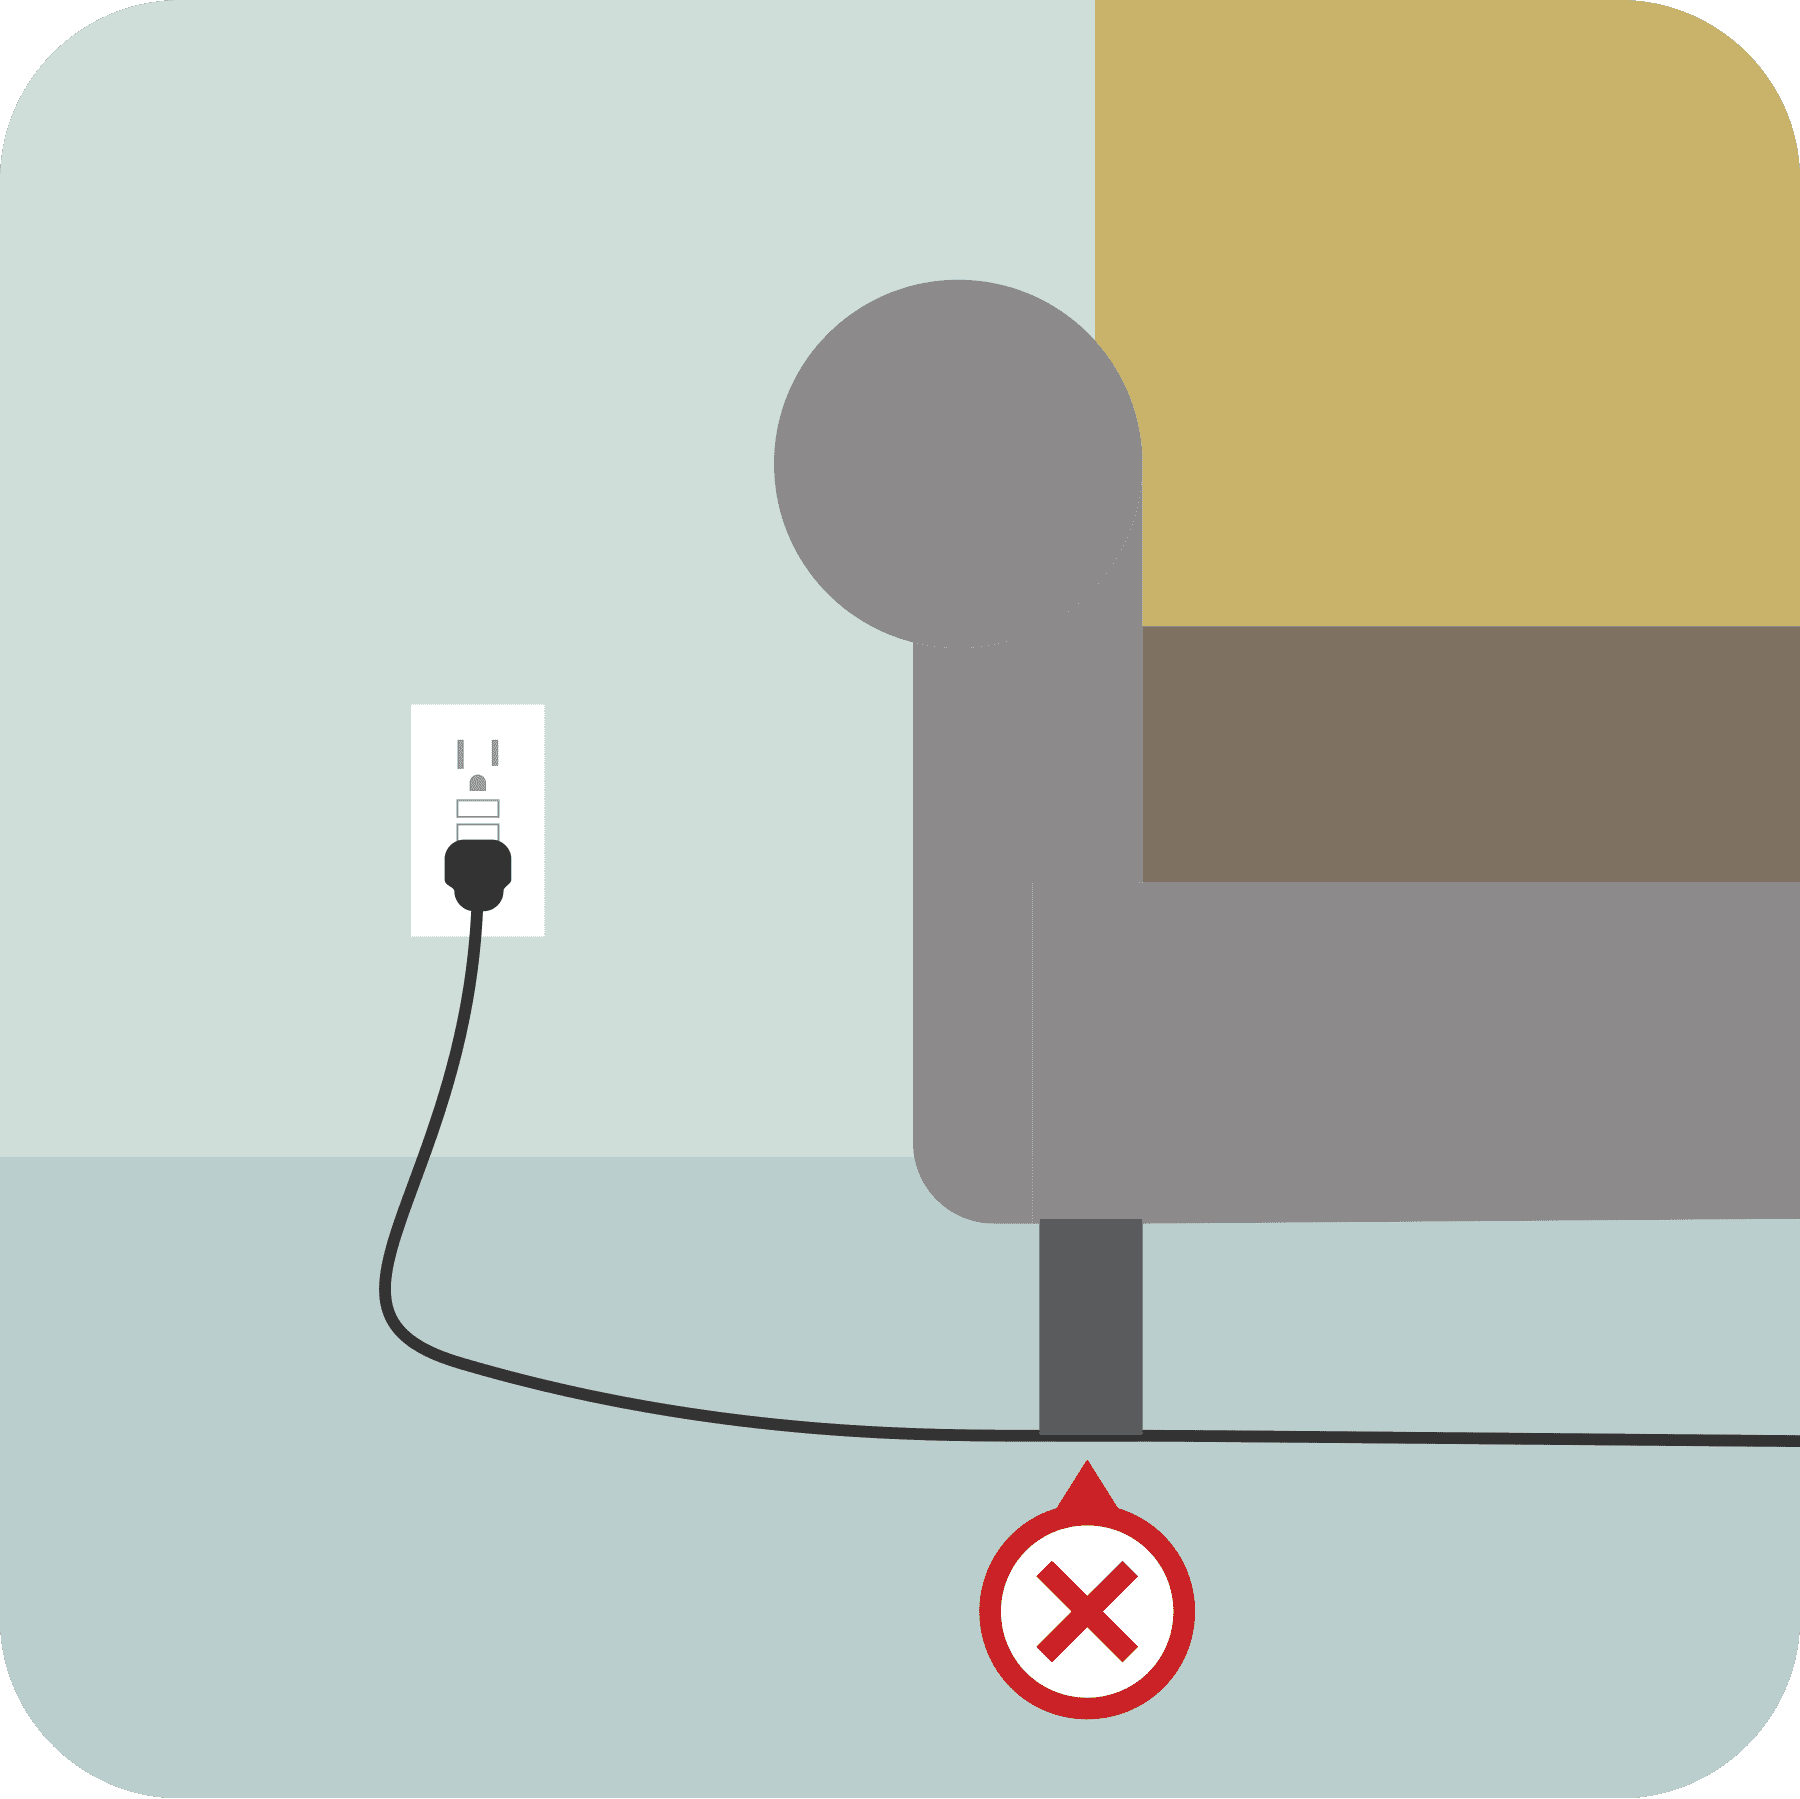 An electrical cord is under a sofa leg with a red x above it.